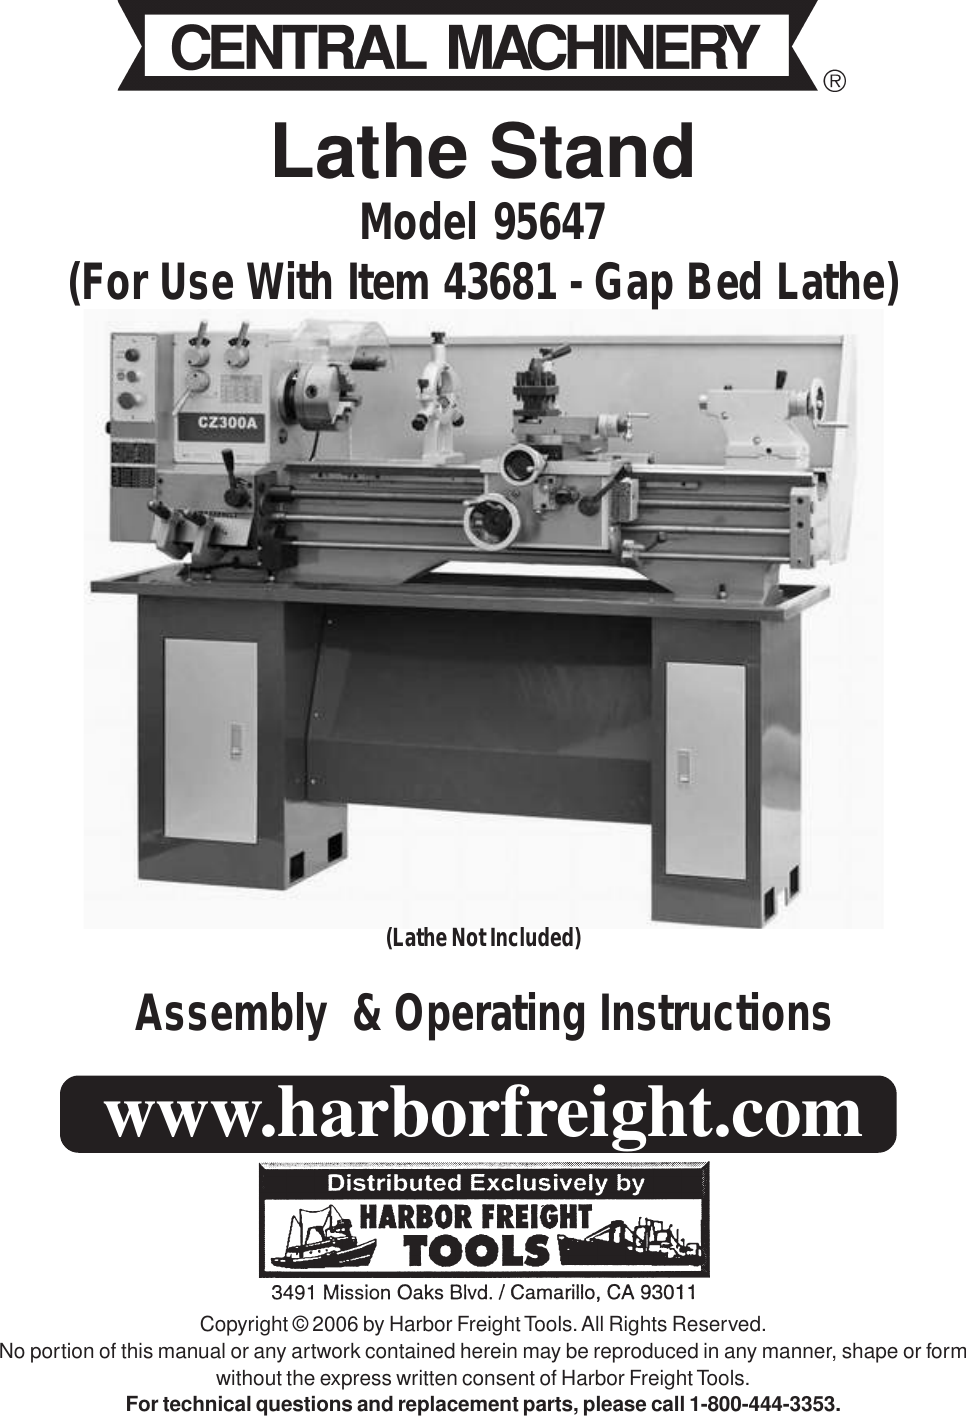 Page 1 of 8 - Harbor-Freight Harbor-Freight-95647-Users-Manual- 43681 Lathe Manual  Harbor-freight-95647-users-manual